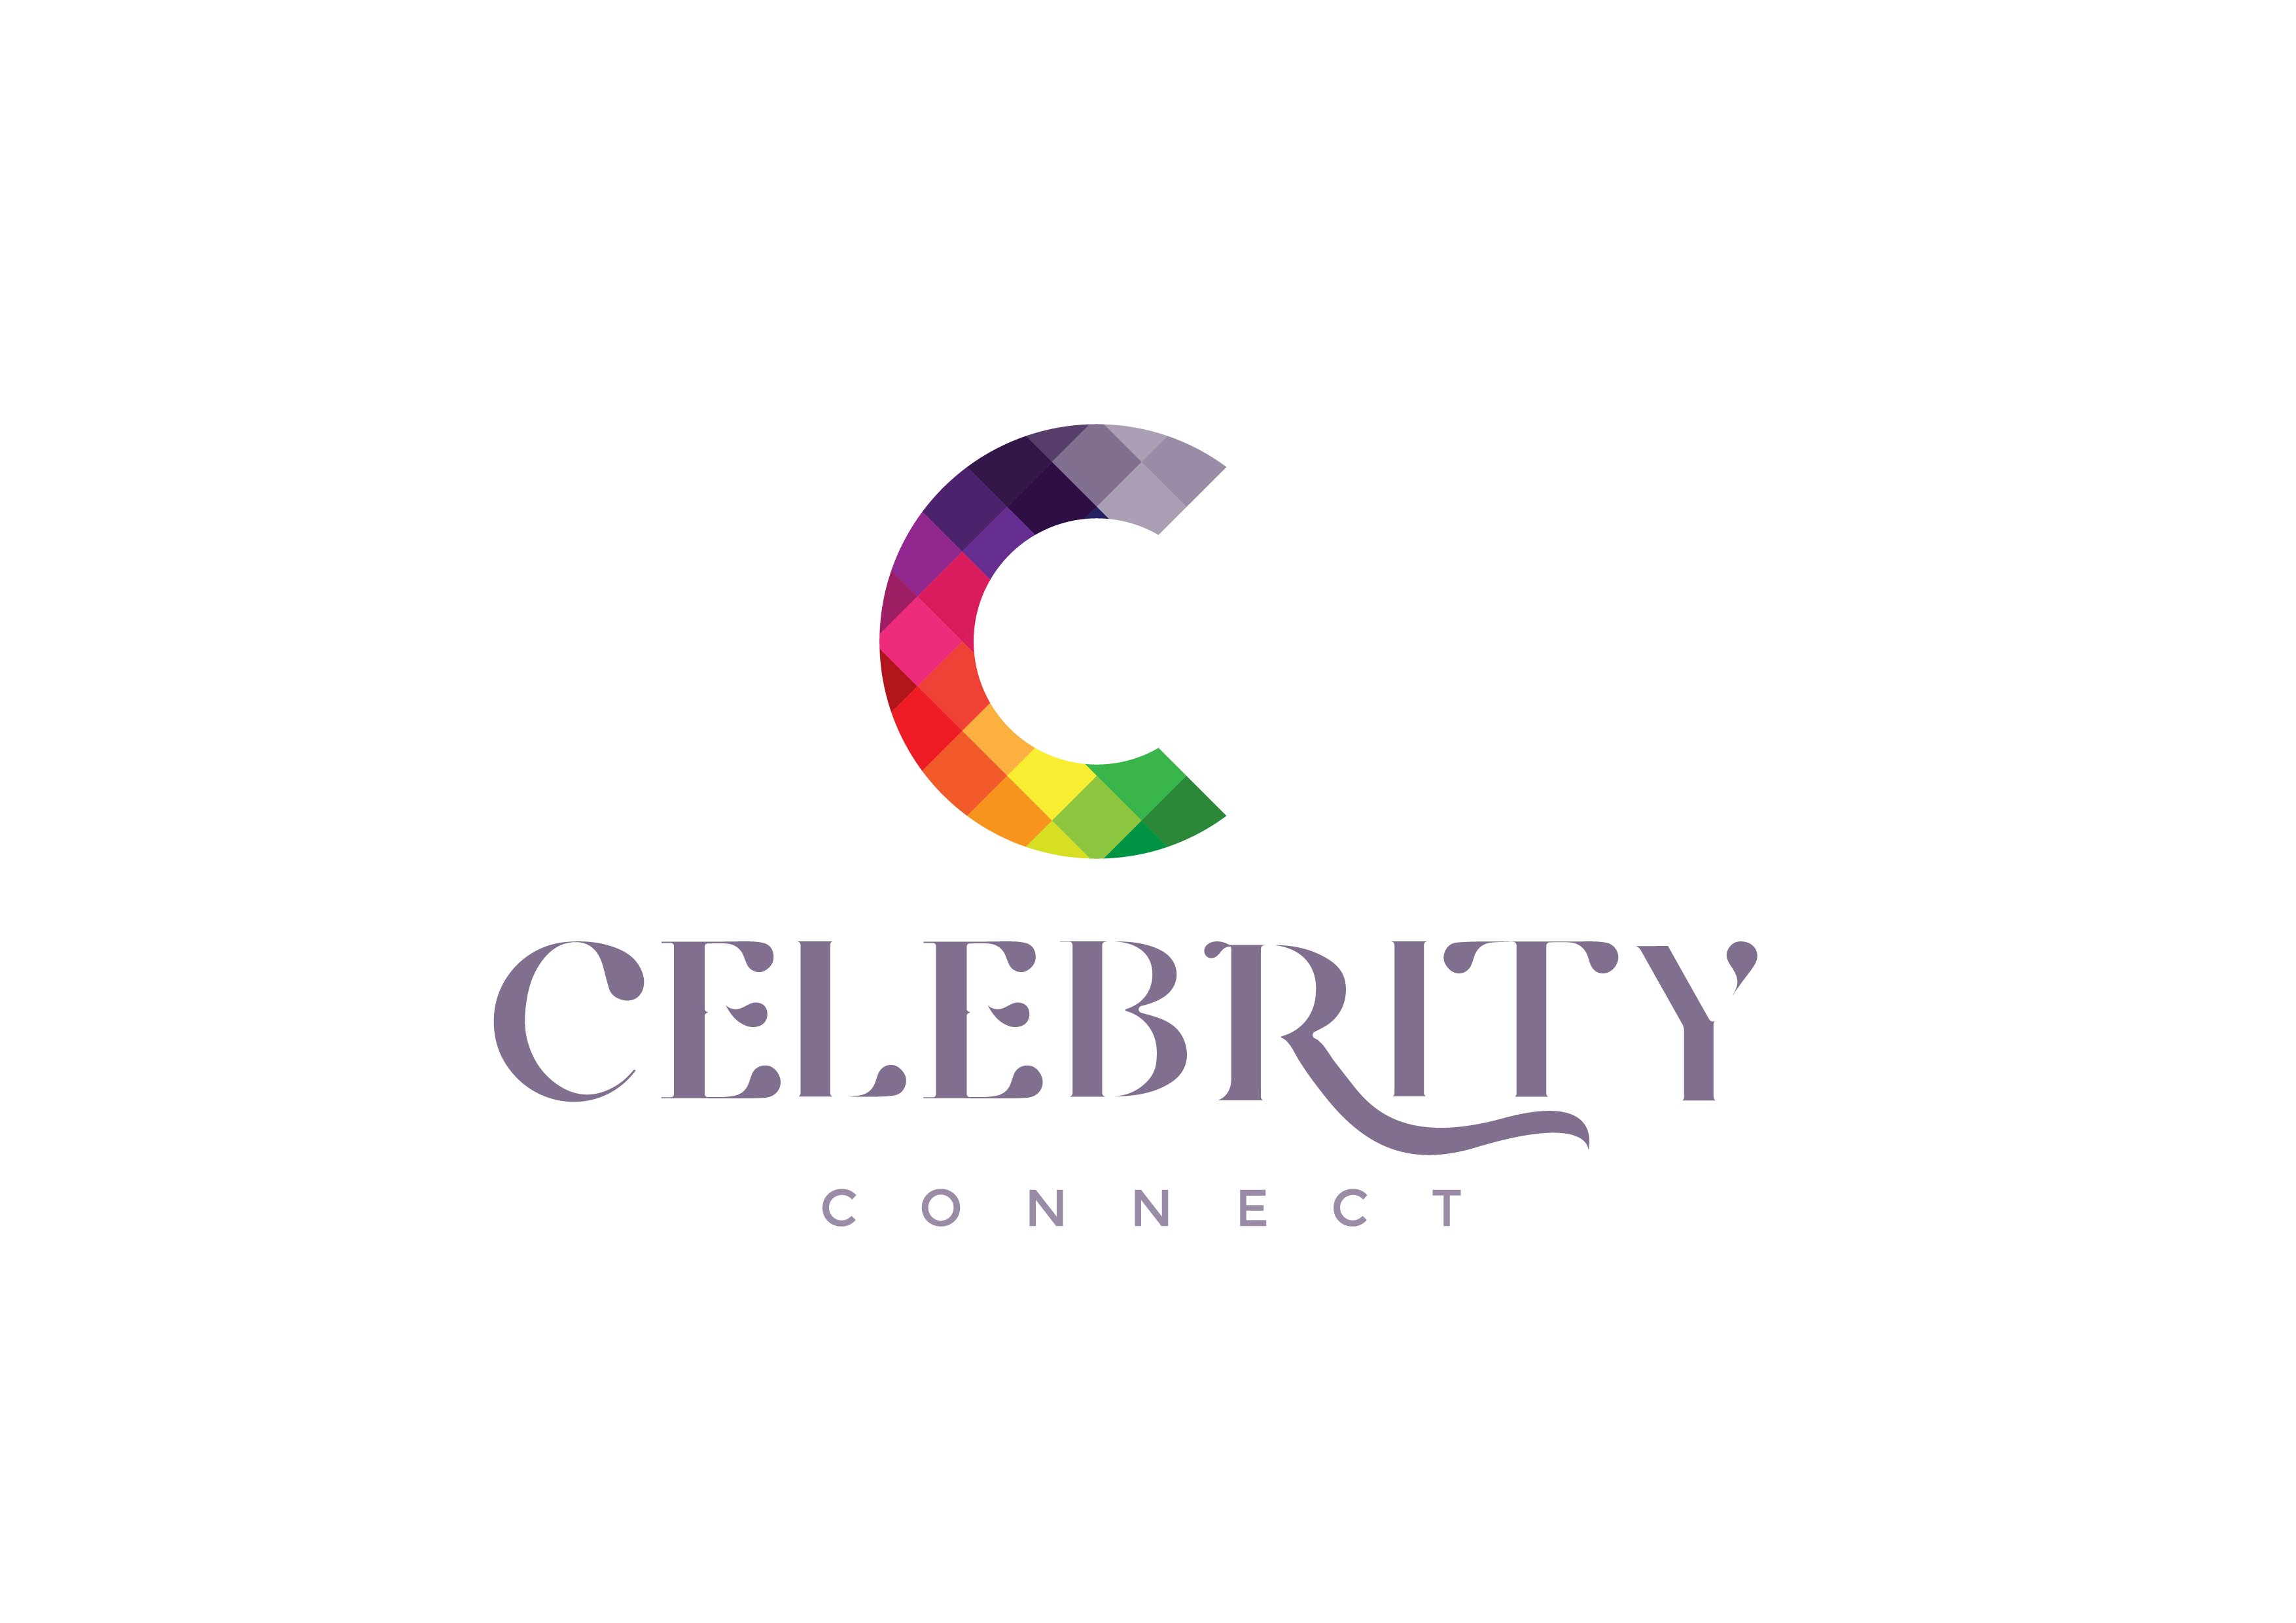 Celebrity Connect